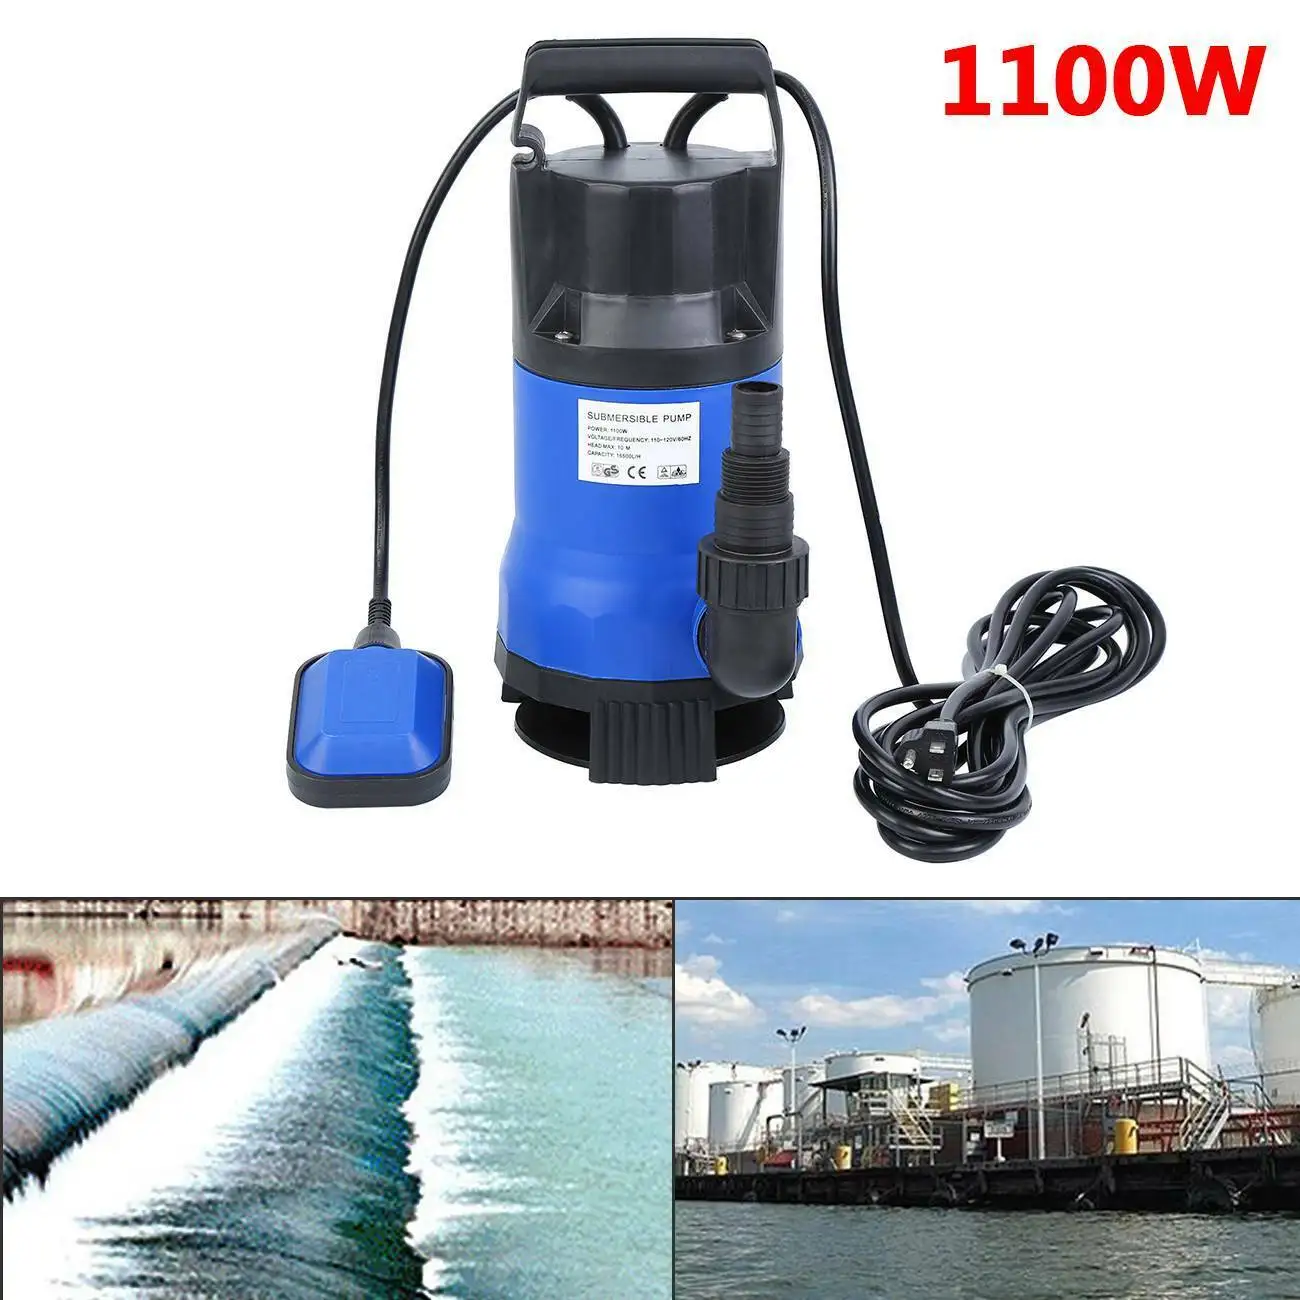 1100W Submersible Pump Clean or Dirty Water Use for Ponds Floods Pools & Gardens 